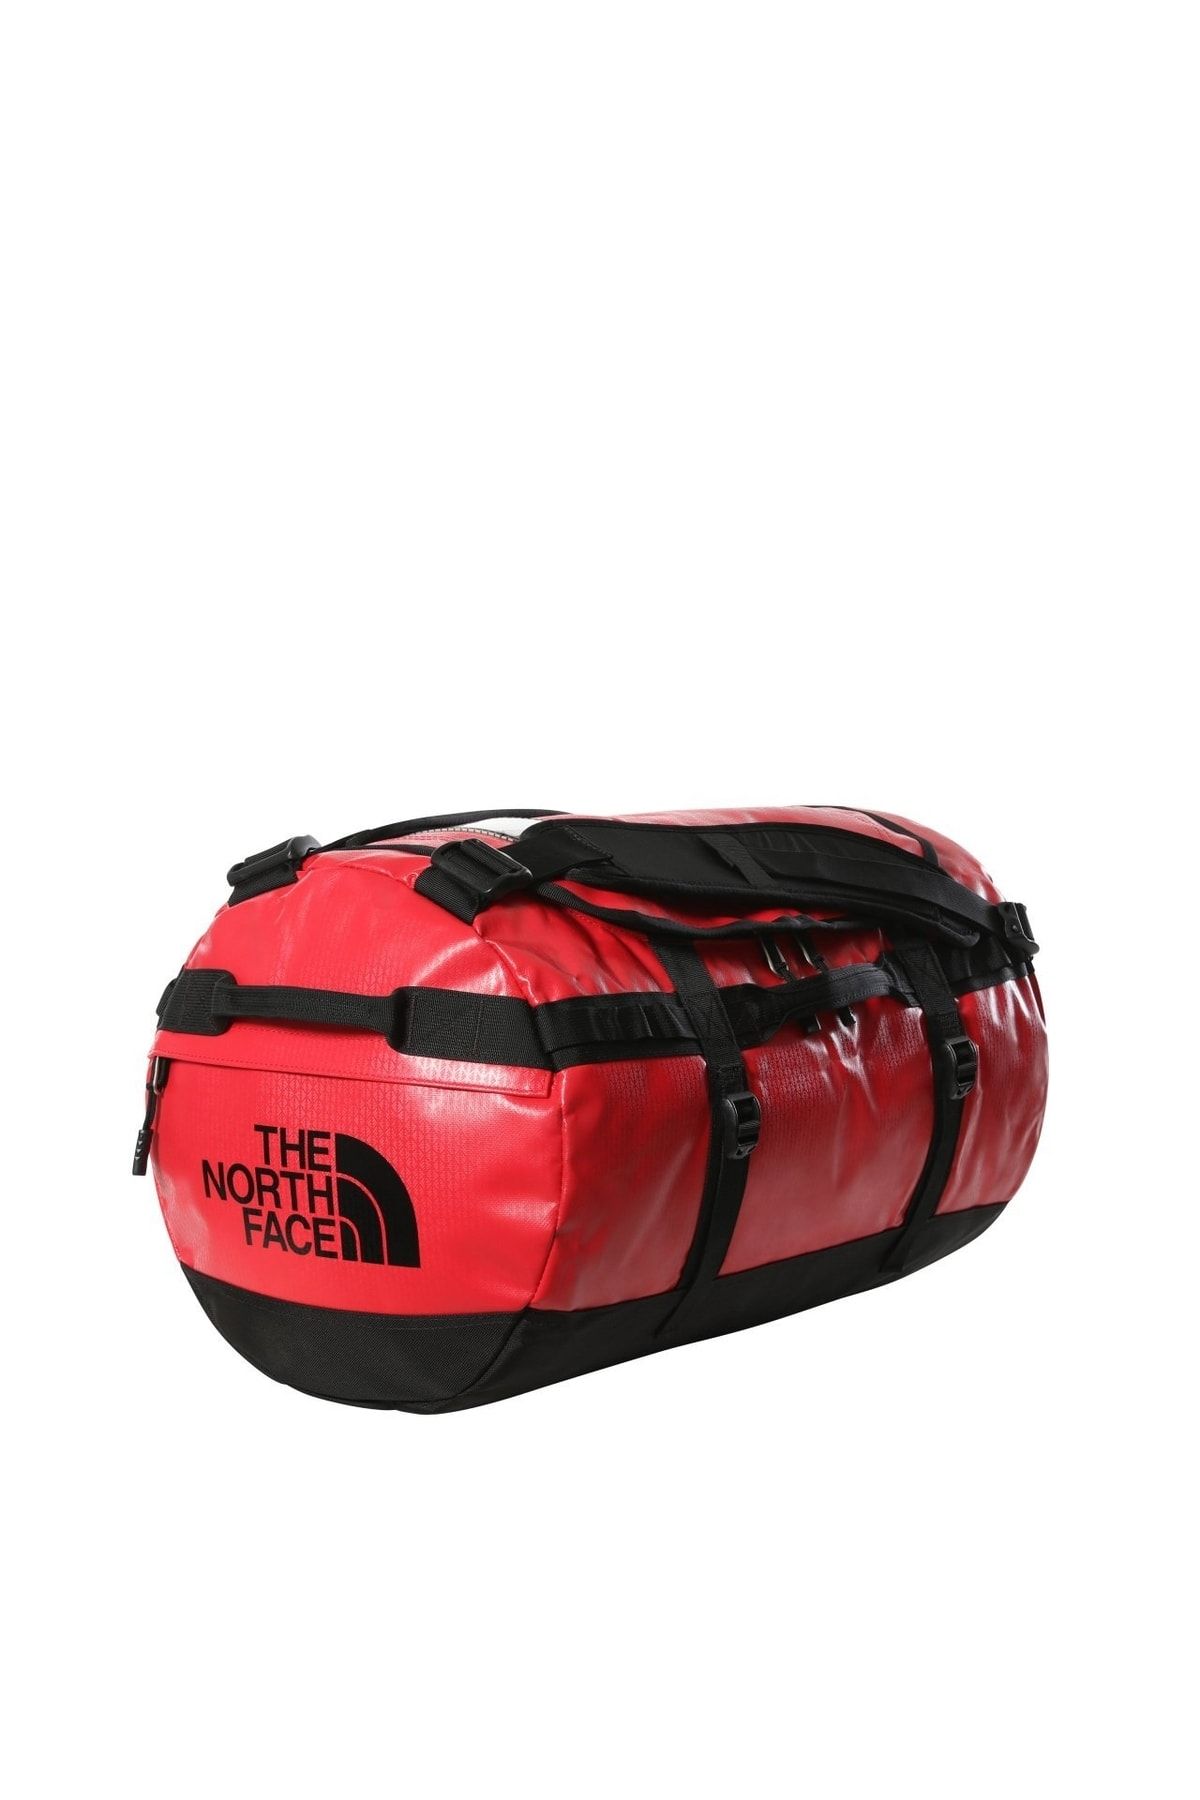 The North Face The Northface Base Camp Duffel Çanta - S Nf0a52stkz31